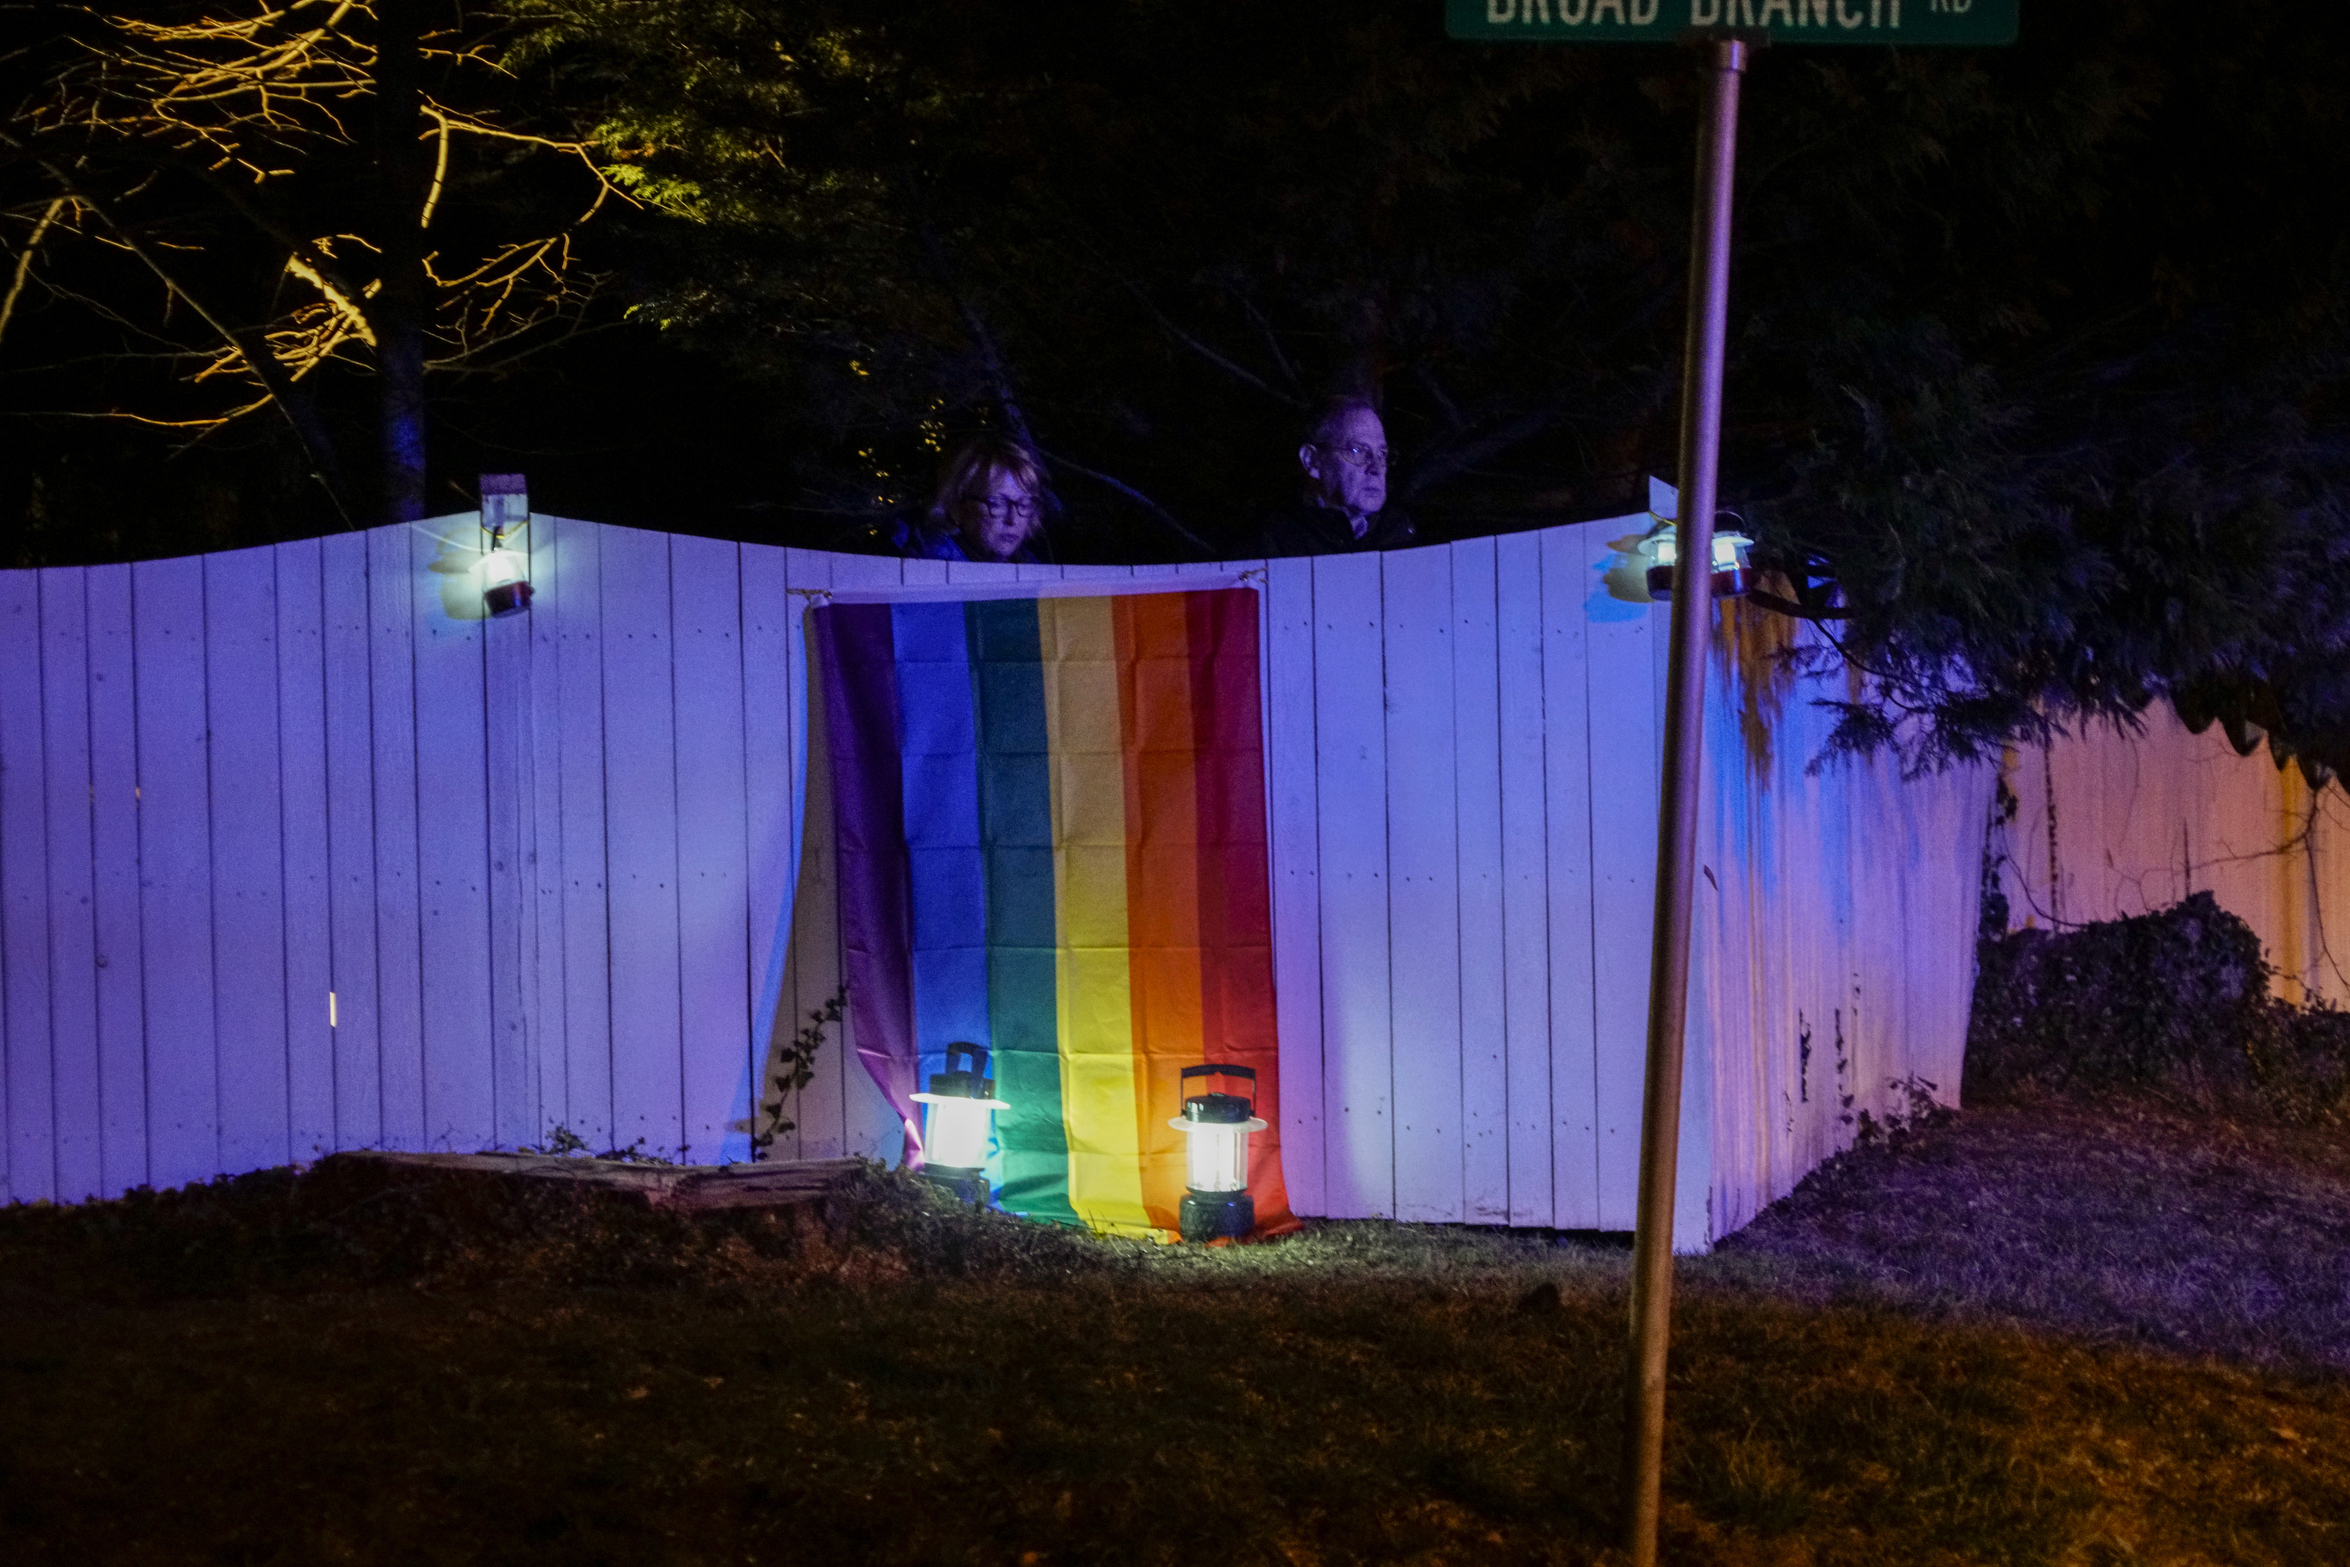 2017. Chevy Chase, Maryland. USA.  The "Queer Dance Party at Mike Pence's House," a dance event organized by LGBTQ activist groups DisruptJ20 and WERK for Peace to protest Mike Pence's record on gay and transgender rights.